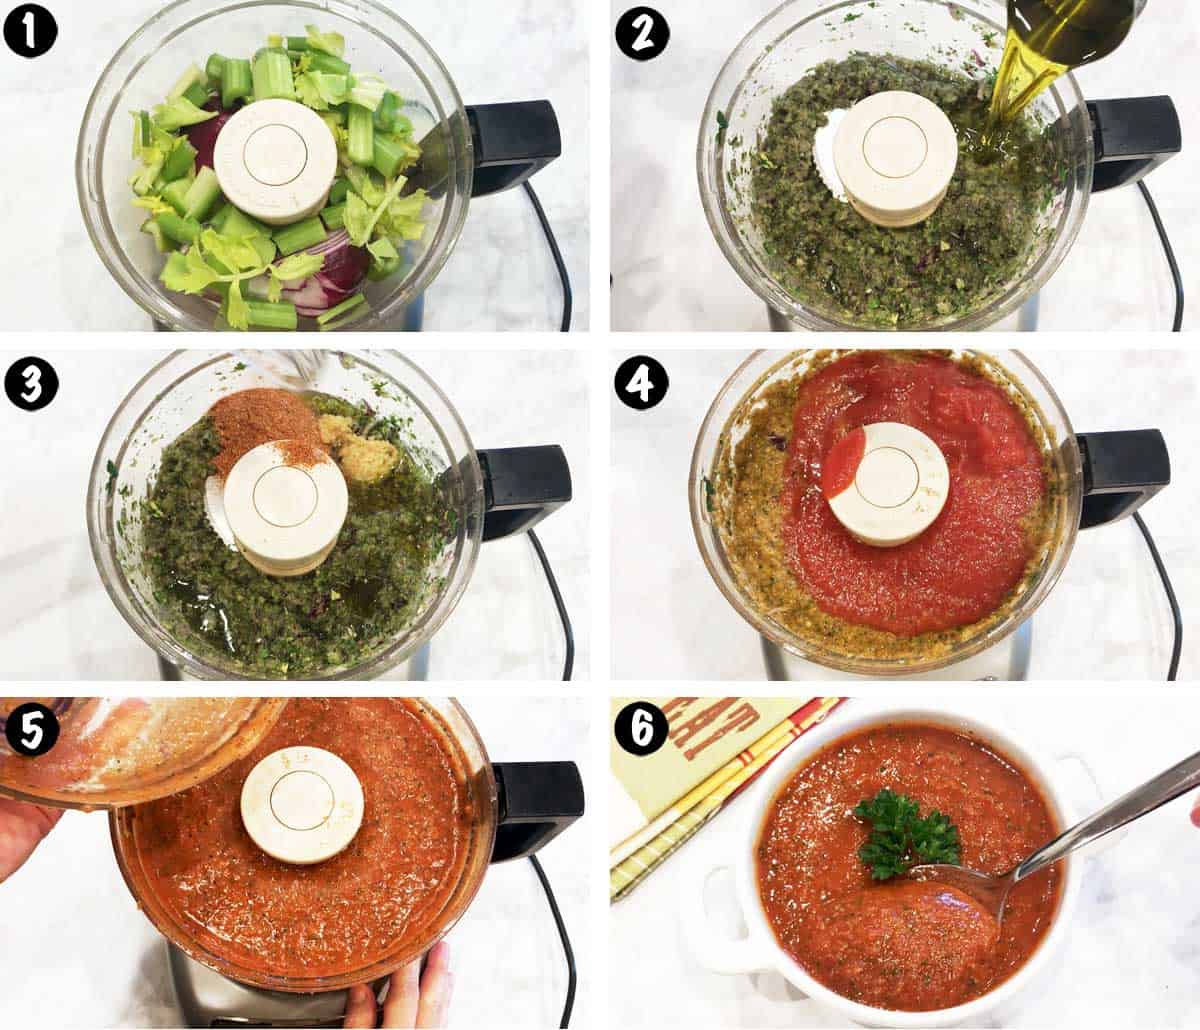 A photo collage showing the steps for making gazpacho. 